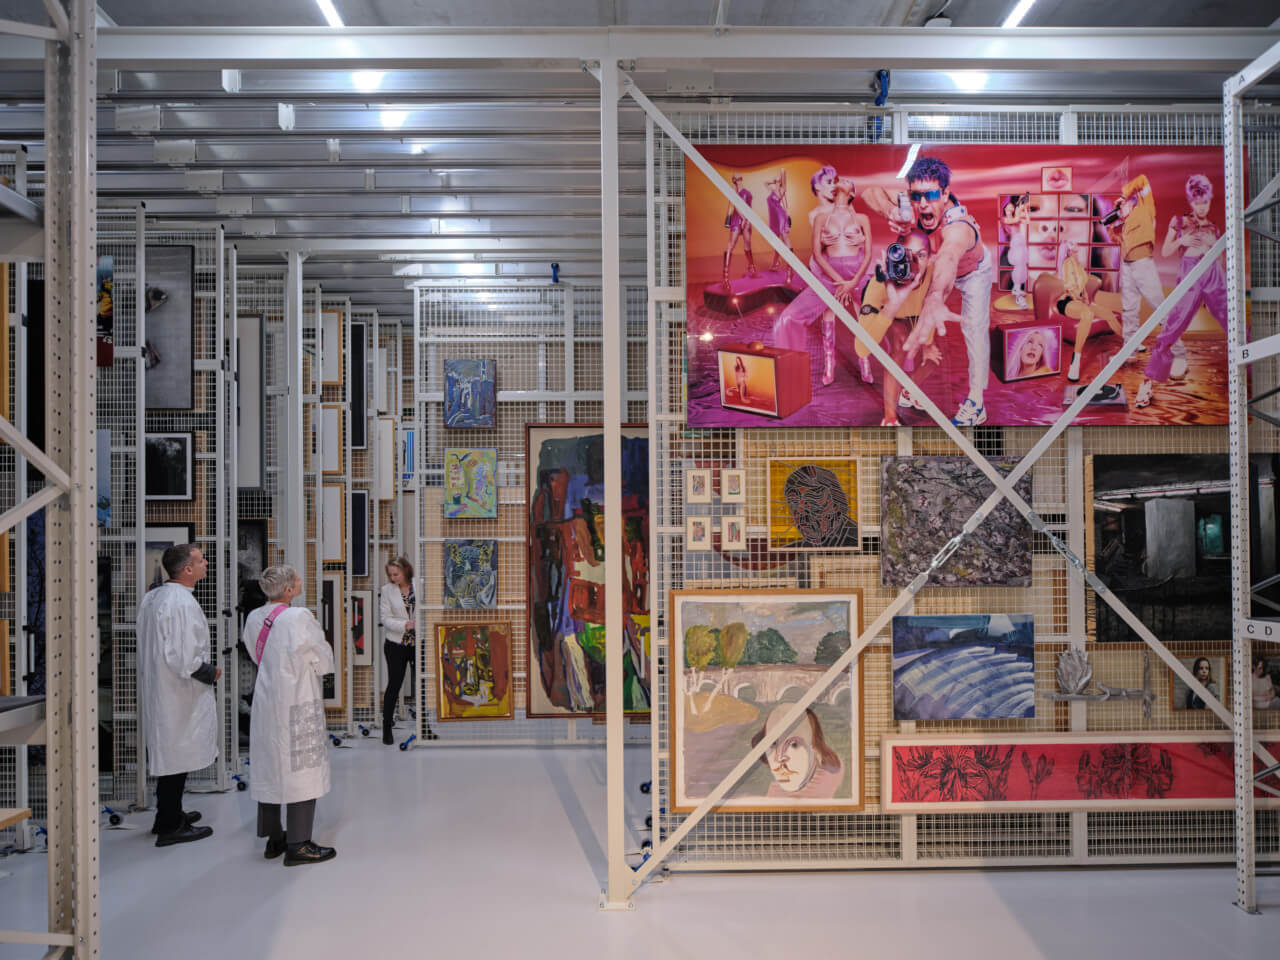 people admire artworks in an open storage facility